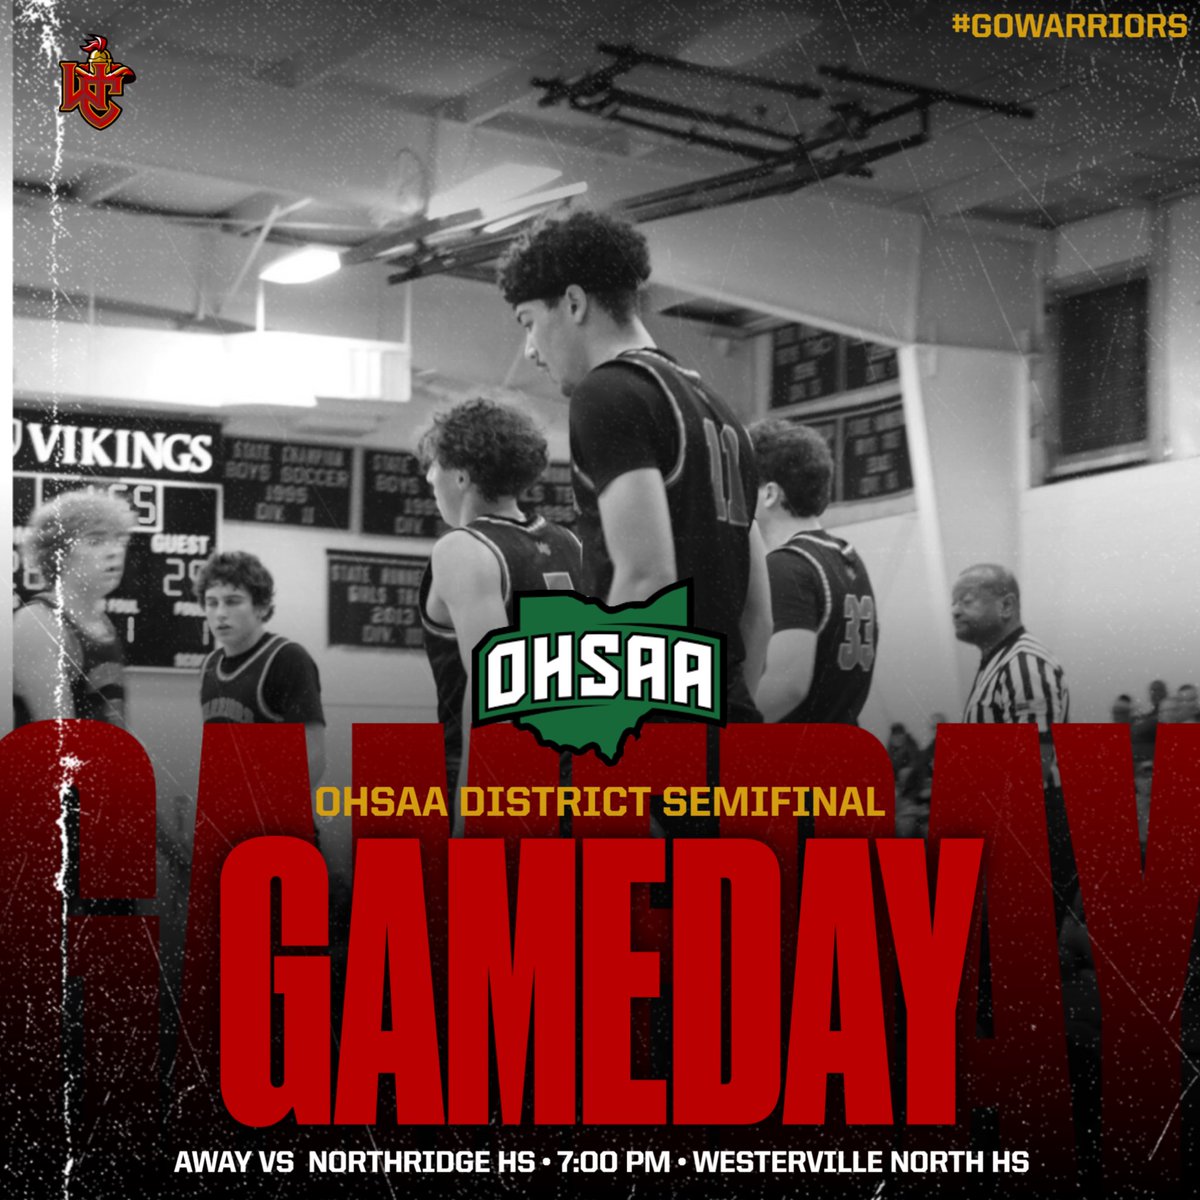 🚨 GAME DAY 🚨 OHSAA DISTRICT SEMIFINAL 📍 Westerville North HS ⌚️ 7:00 PM 🎟️ ohsaa.org/tickets 🆚 Northridge HS #GoWarriors #SSFS #WeAreWC